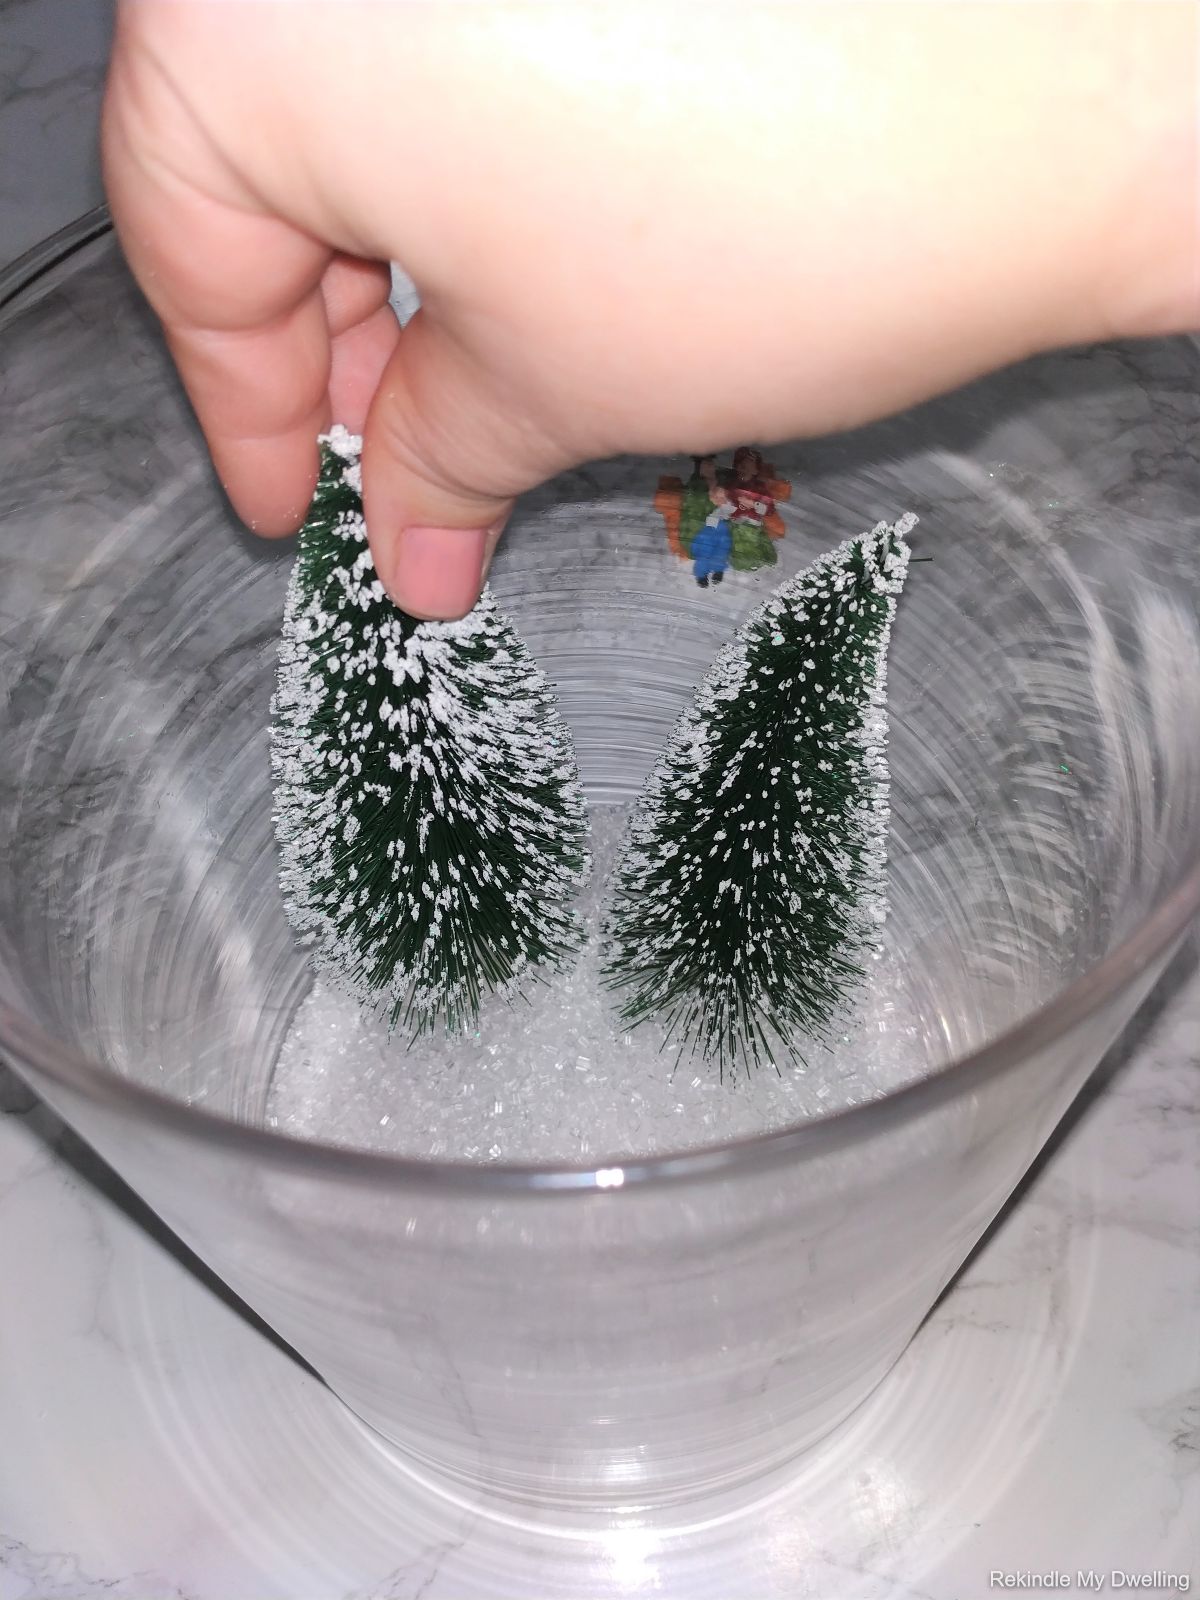 Placing bottle brush trees into the glass jar.